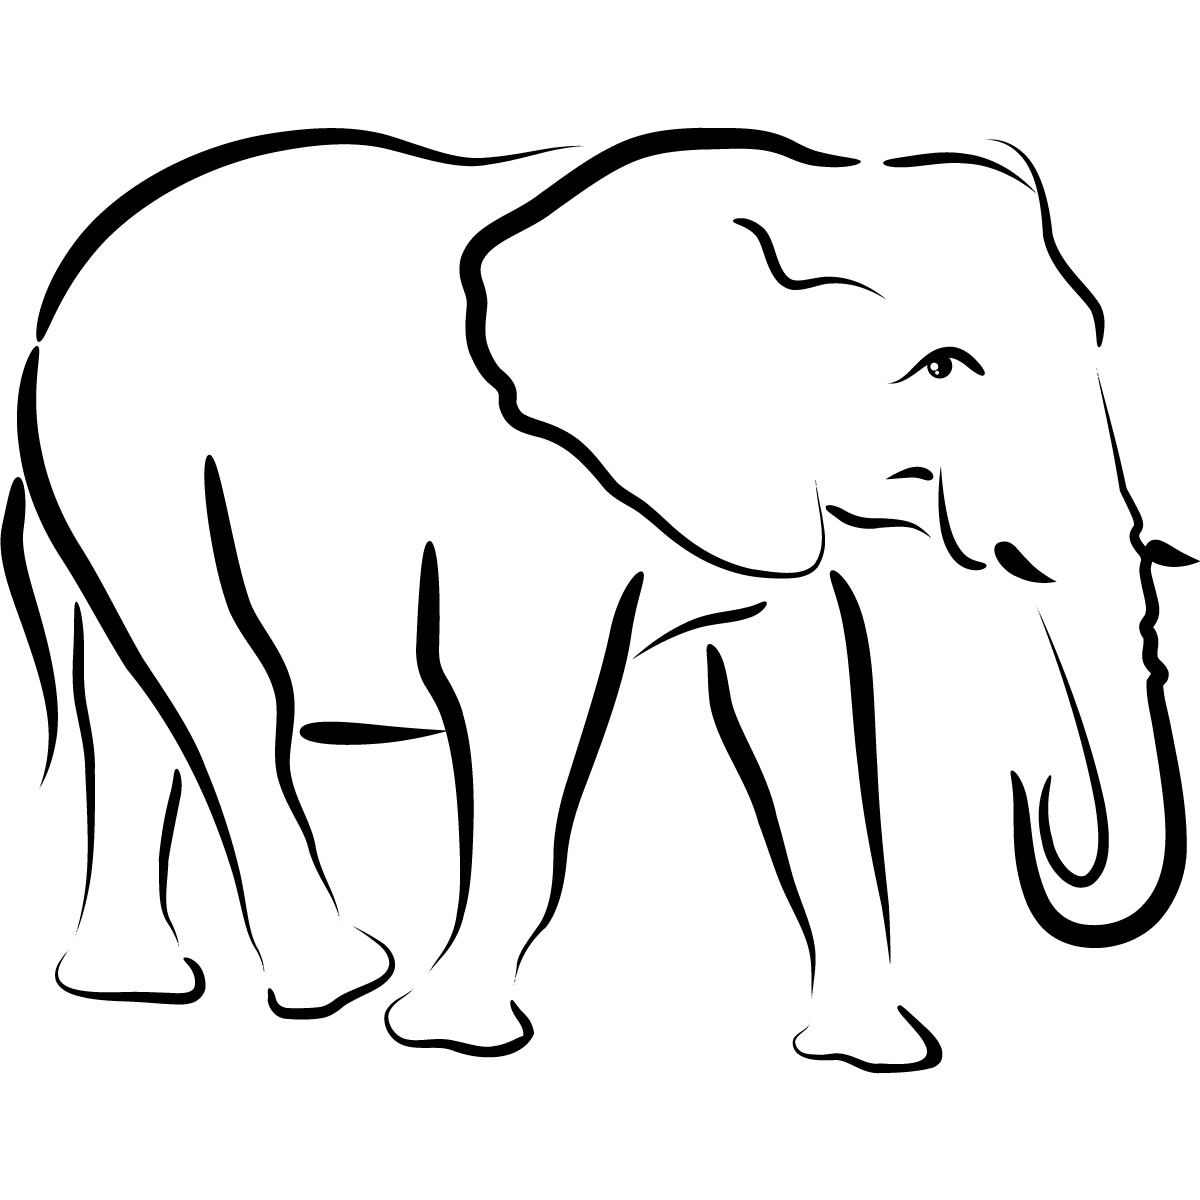 Free Outline Pictures Of Animals, Download Free Clip Art, Free Clip - Free Printable Arty Animal Outlines